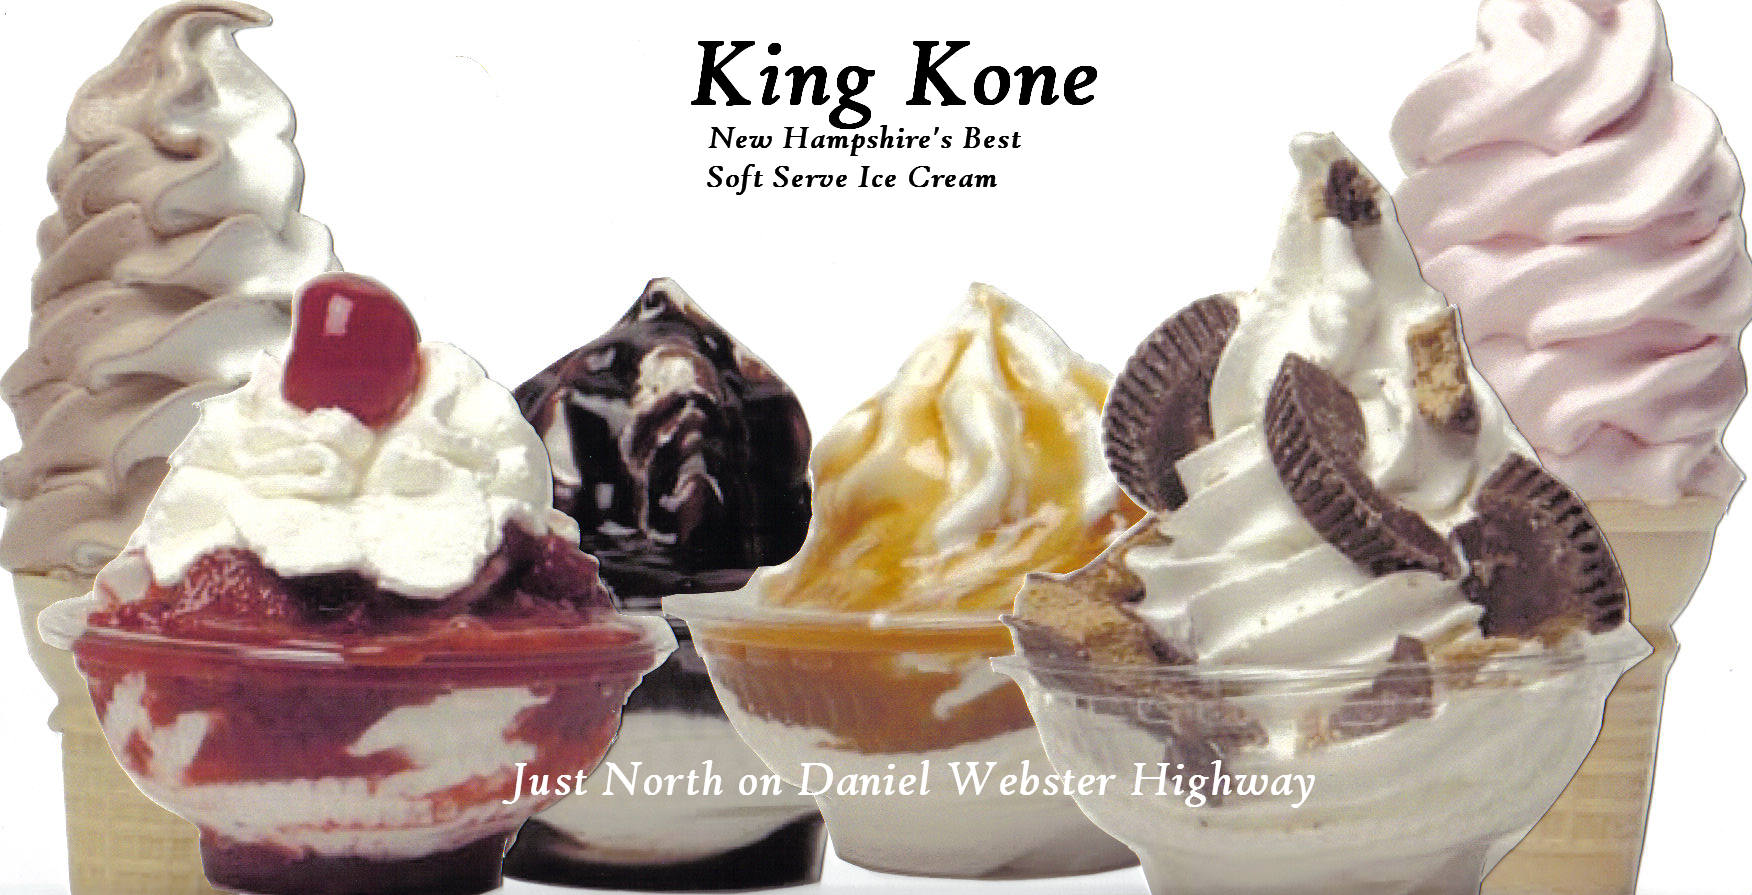 Container of Ice Cream — King Kone